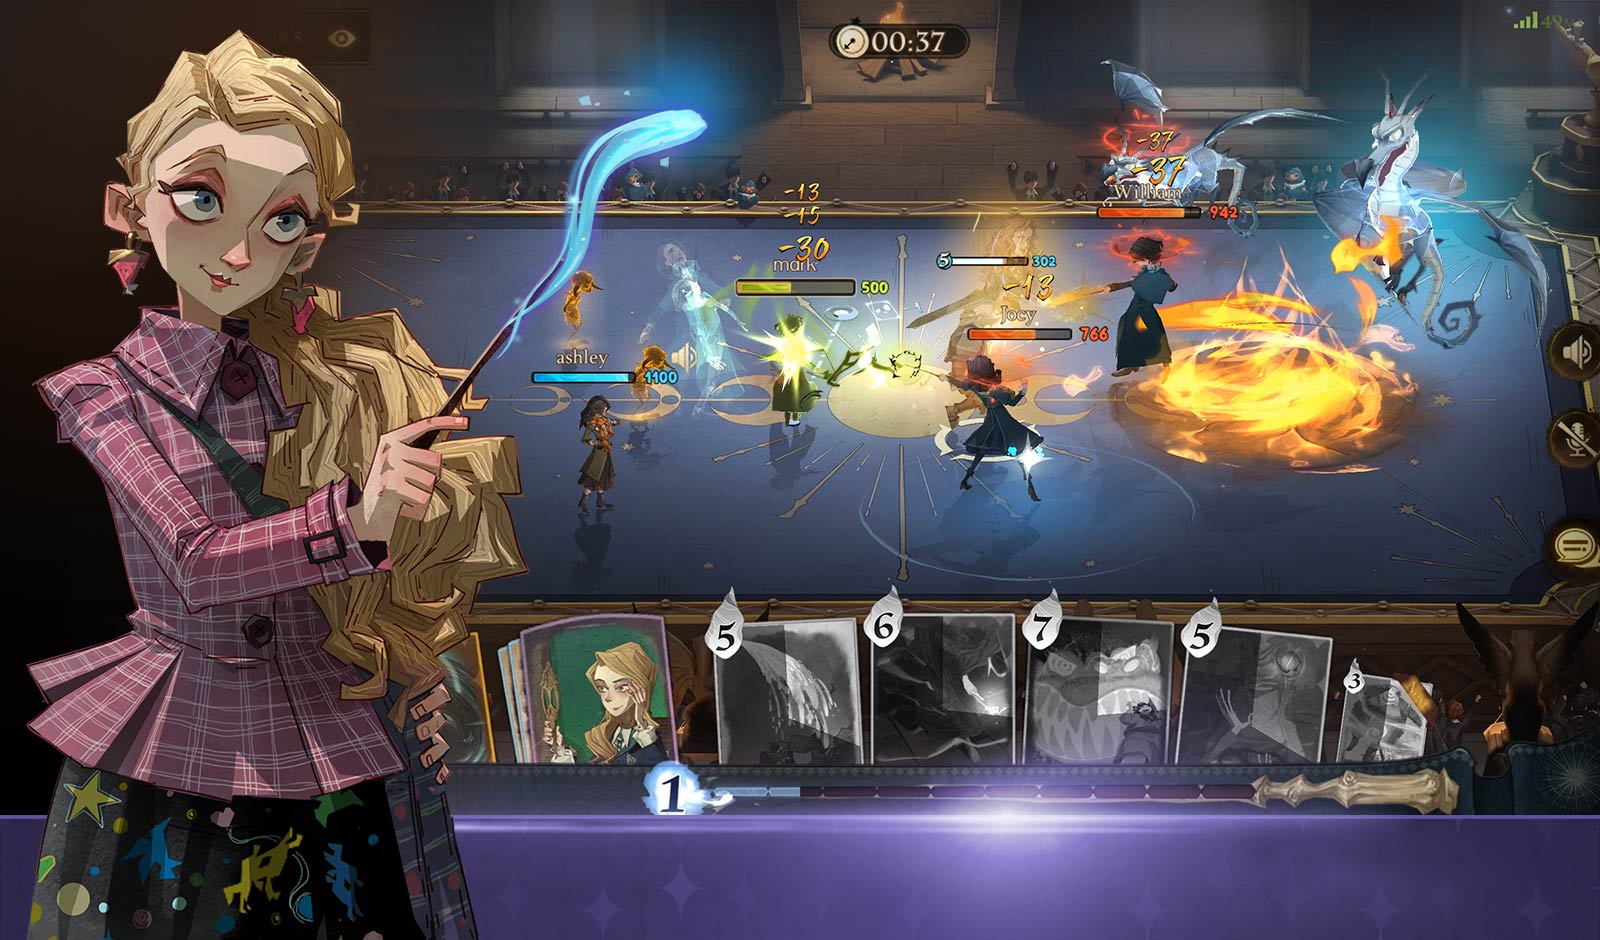 Harry Potter: Magic Awakened is a digital card game coming this year